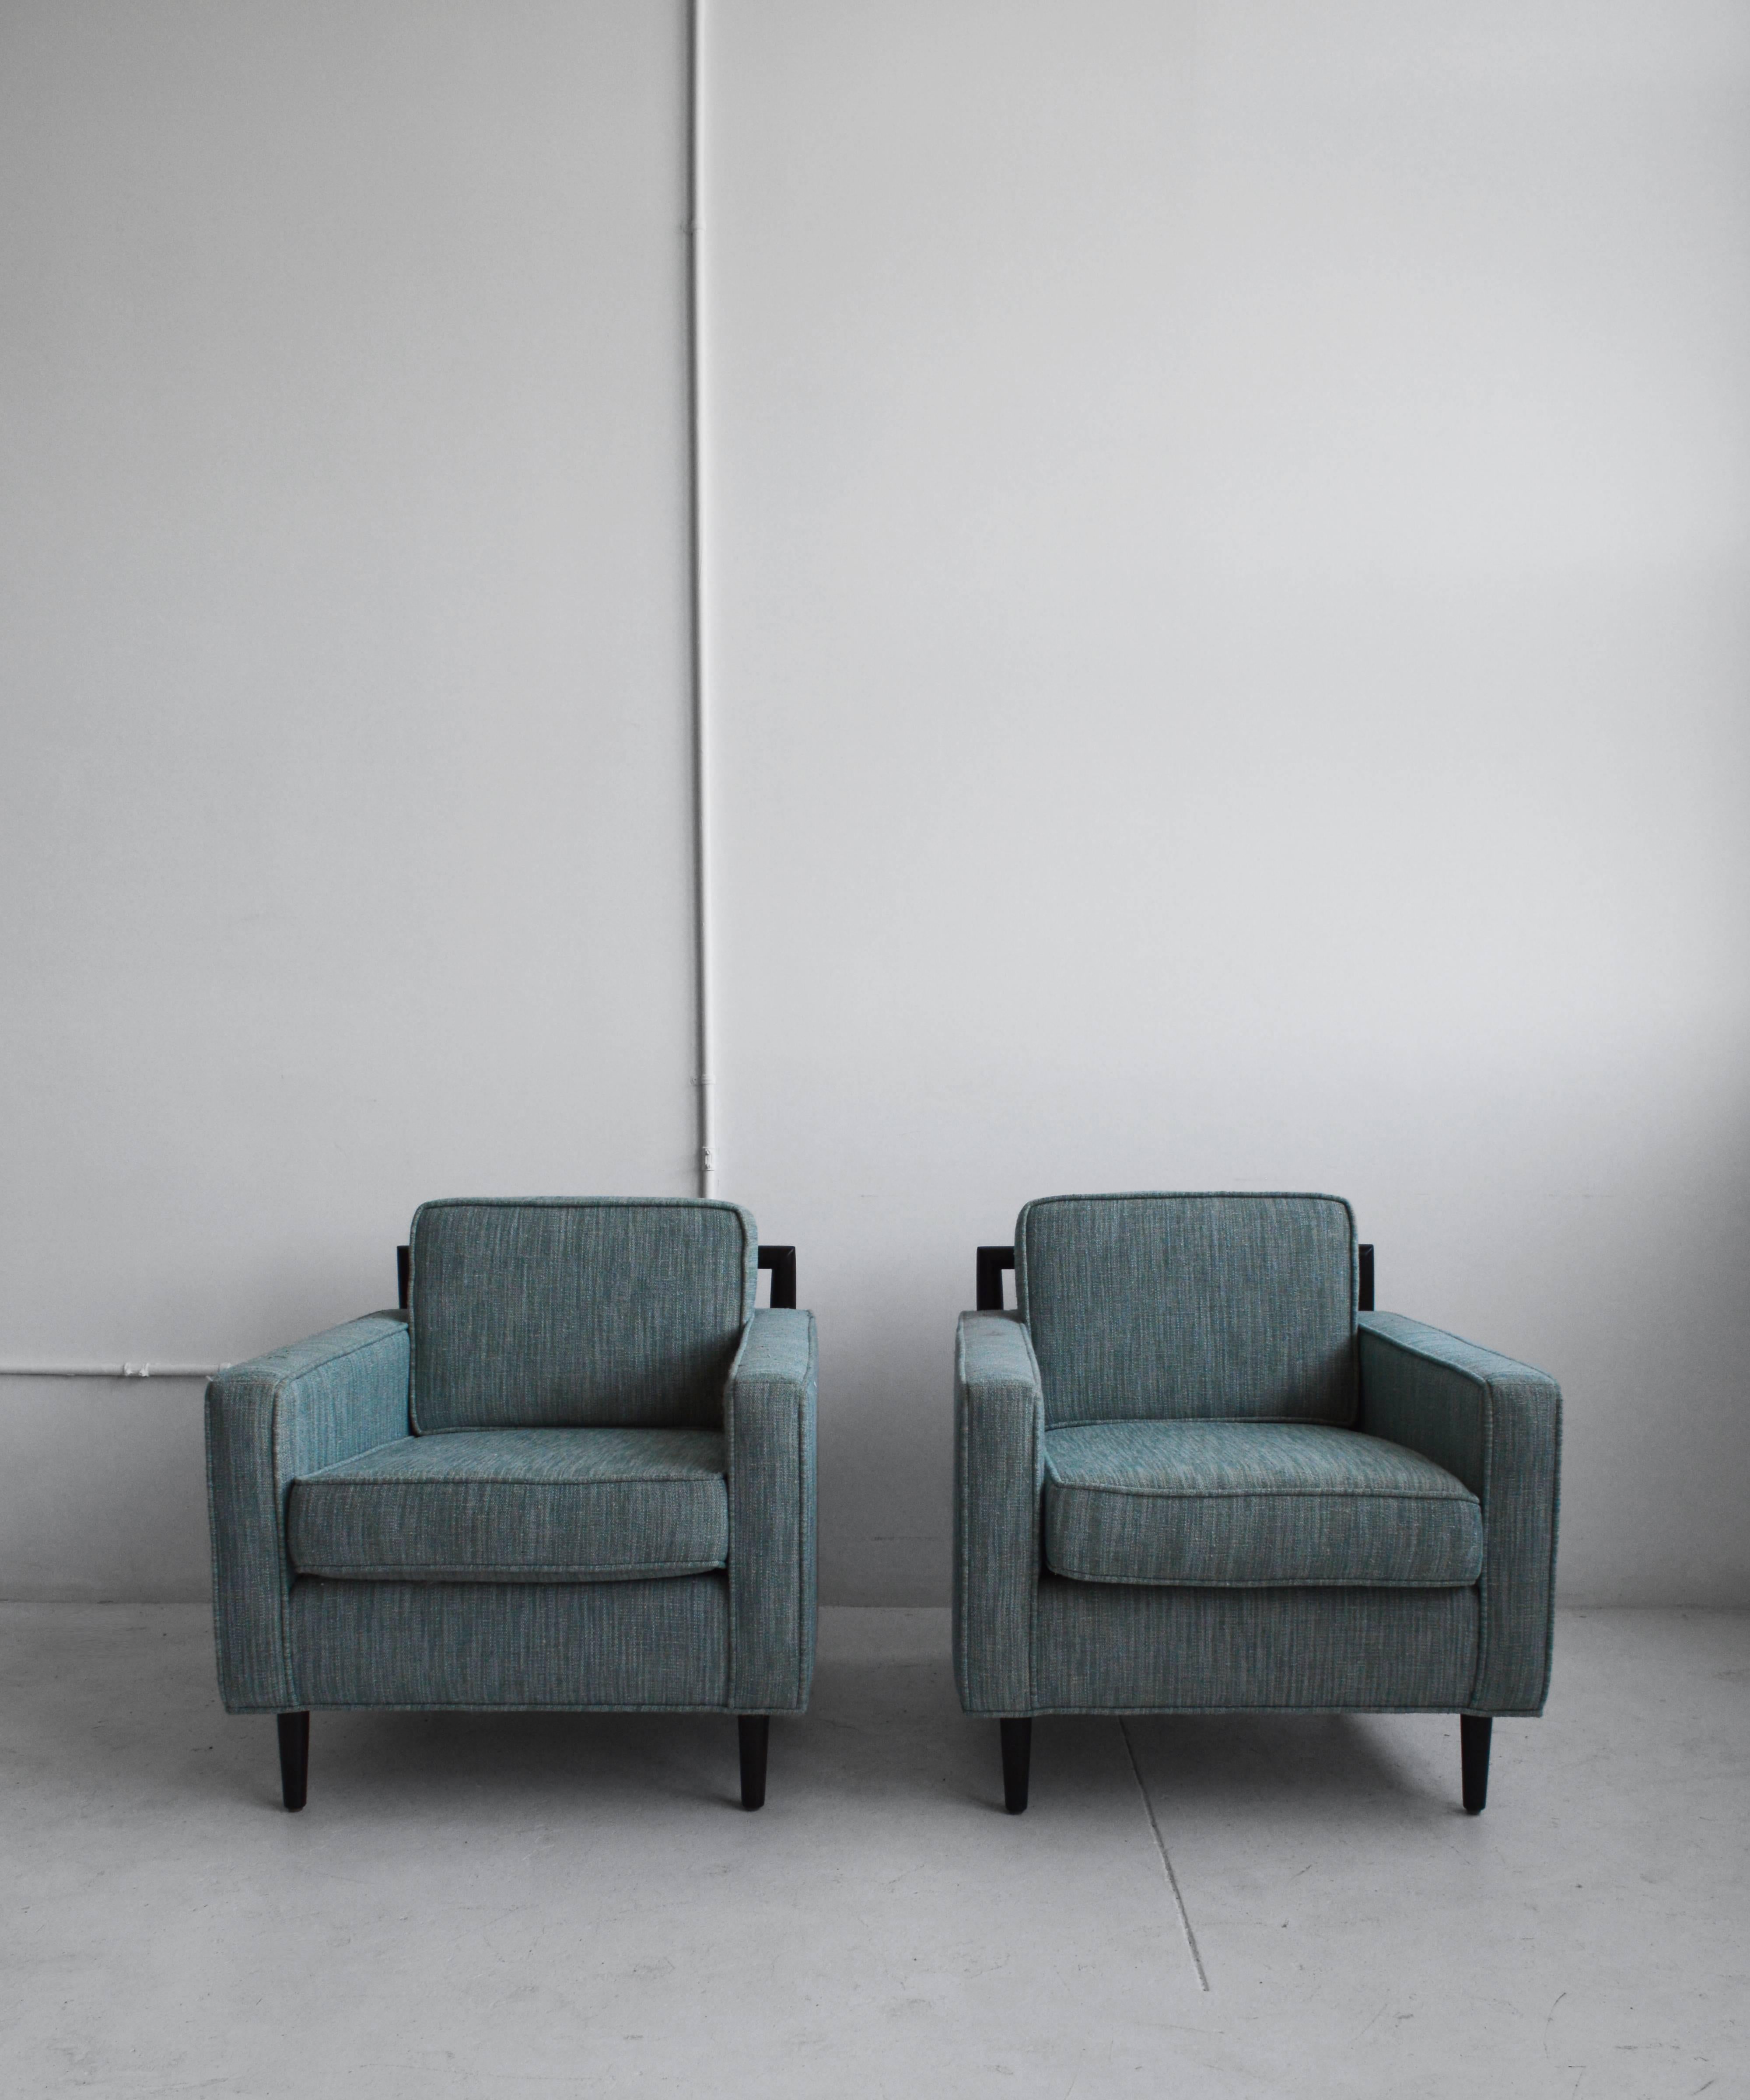 Pair of chic, Mid-Century inspired lounge chairs designed by Michele Sommerlath and produced in LA by Atelier Sommerlath. The pair of chairs have solid walnut backrests and are upholstered in a textured, blue upholstery. These chairs would make a